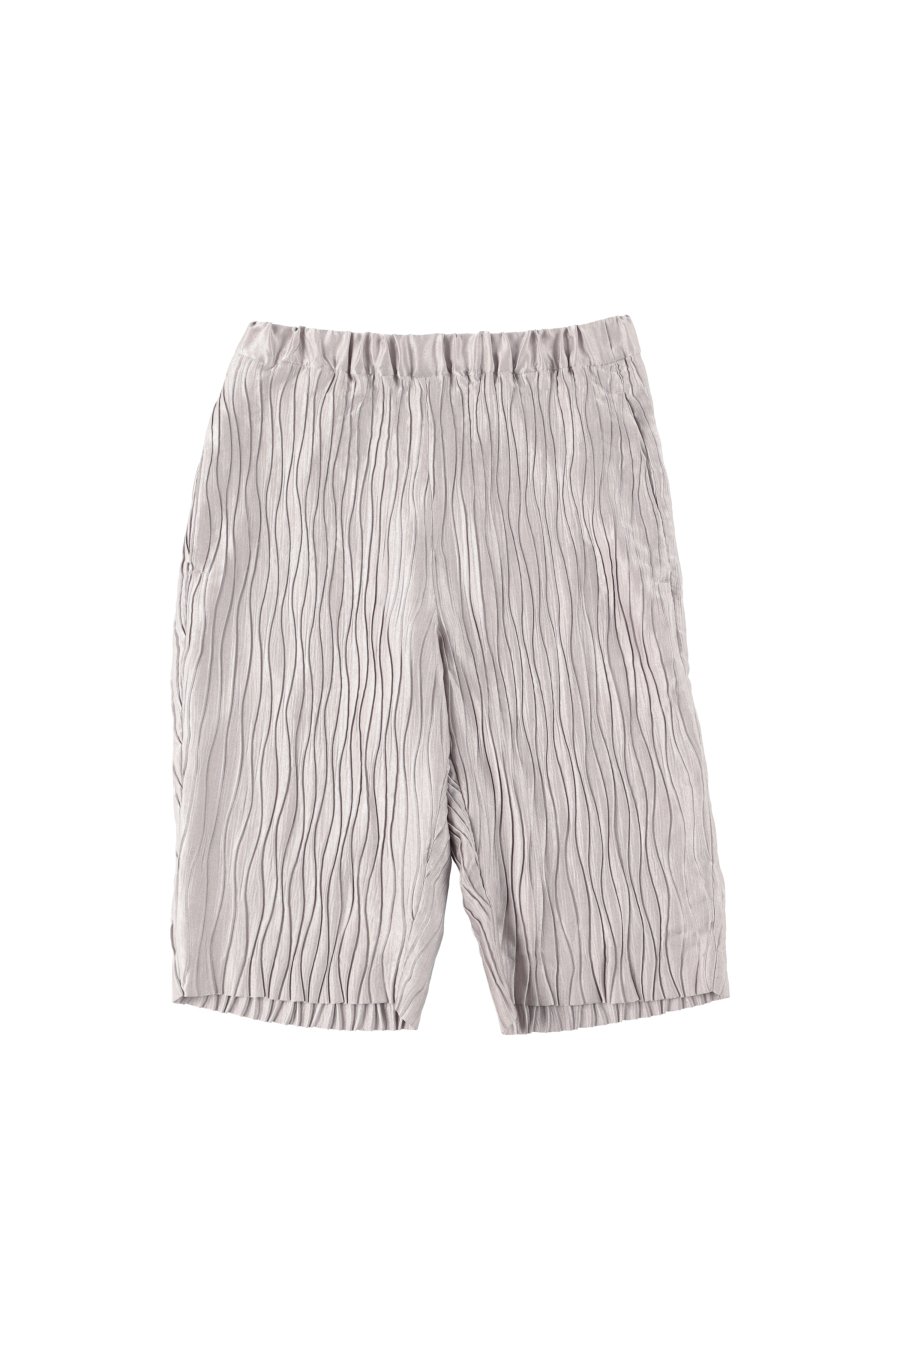 BELPER  PLEATED SHORTS(SILVER)<img class='new_mark_img2' src='https://img.shop-pro.jp/img/new/icons15.gif' style='border:none;display:inline;margin:0px;padding:0px;width:auto;' />